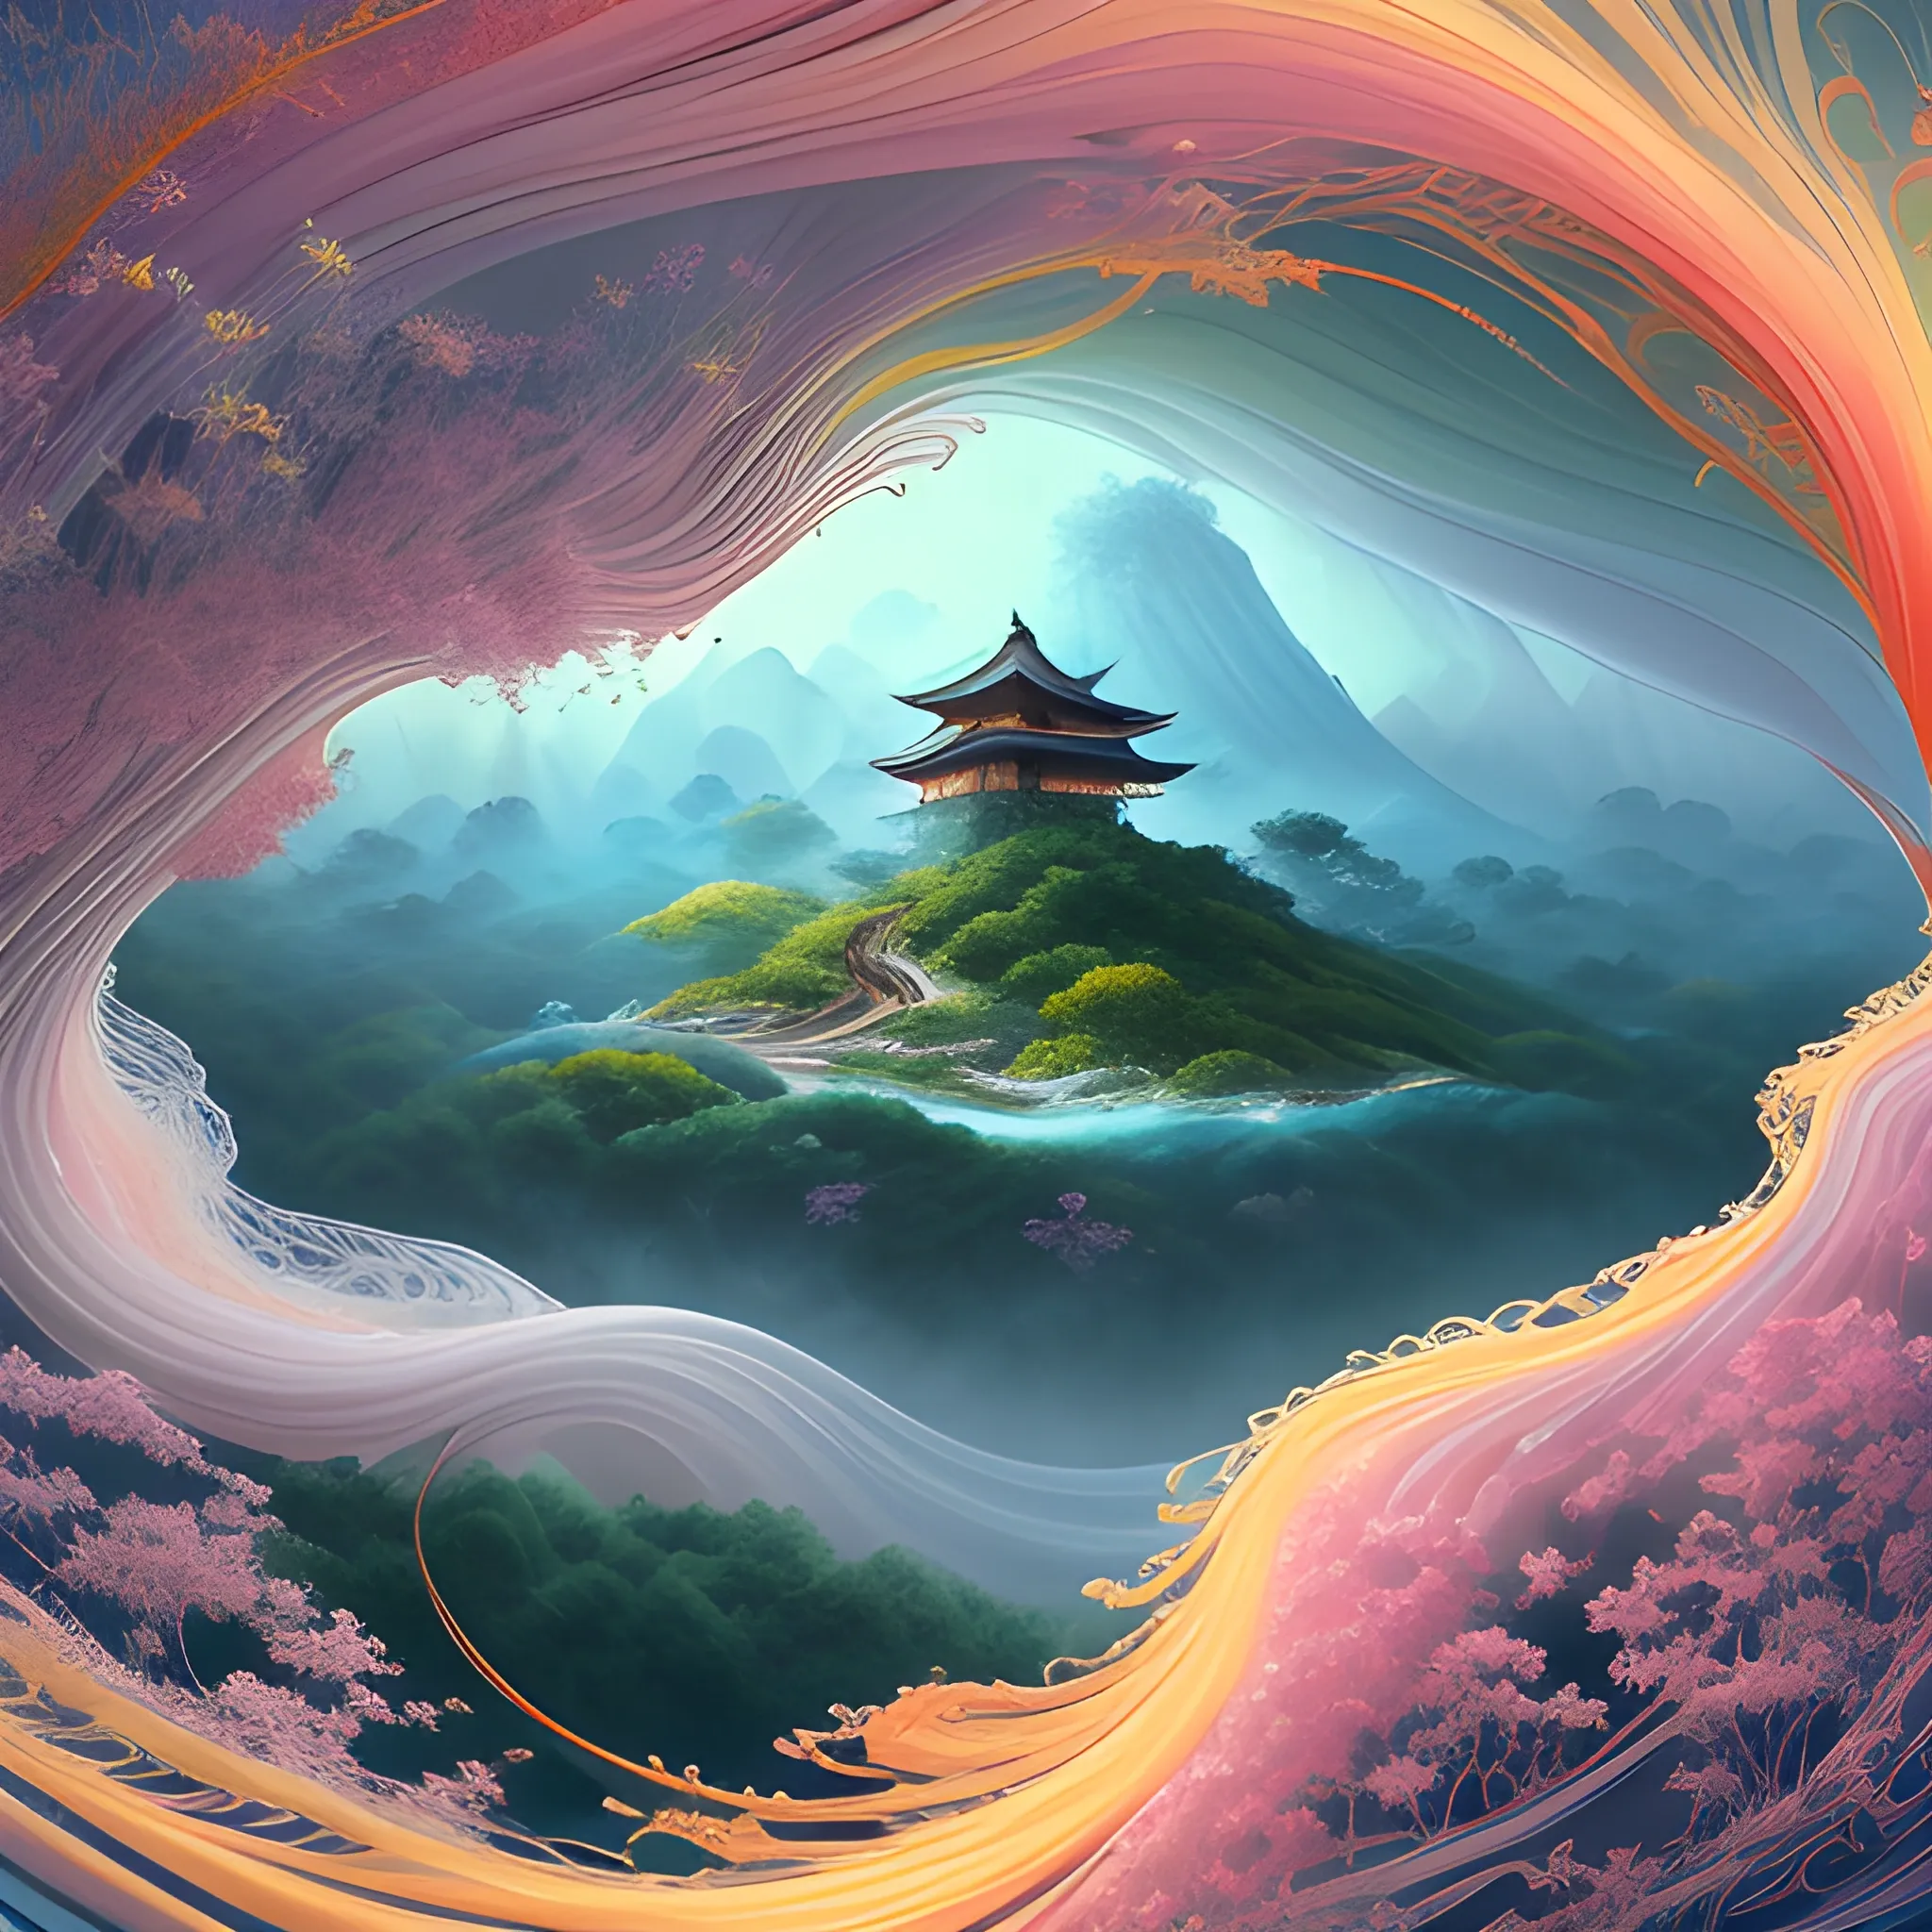 (by Ananta Mandal (and Andrew Biraj:0.5)), (in the style of nihonga), Style: Abstract, Medium: Digital illustration, Subject: An otherworldly landscape with floating islands, cascading waterfalls, and vibrant flora and fauna. Camera Angle: Overhead shot capturing the vastness and intricate details of the scene. The colors are saturated, and the lighting creates a warm and ethereal atmosphere. The painting is highly detailed, with every brushstroke capturing the complexity of the imaginary world., (high quality), (detailed), (masterpiece), (best quality), (highres), (extremely detailed), (8k)